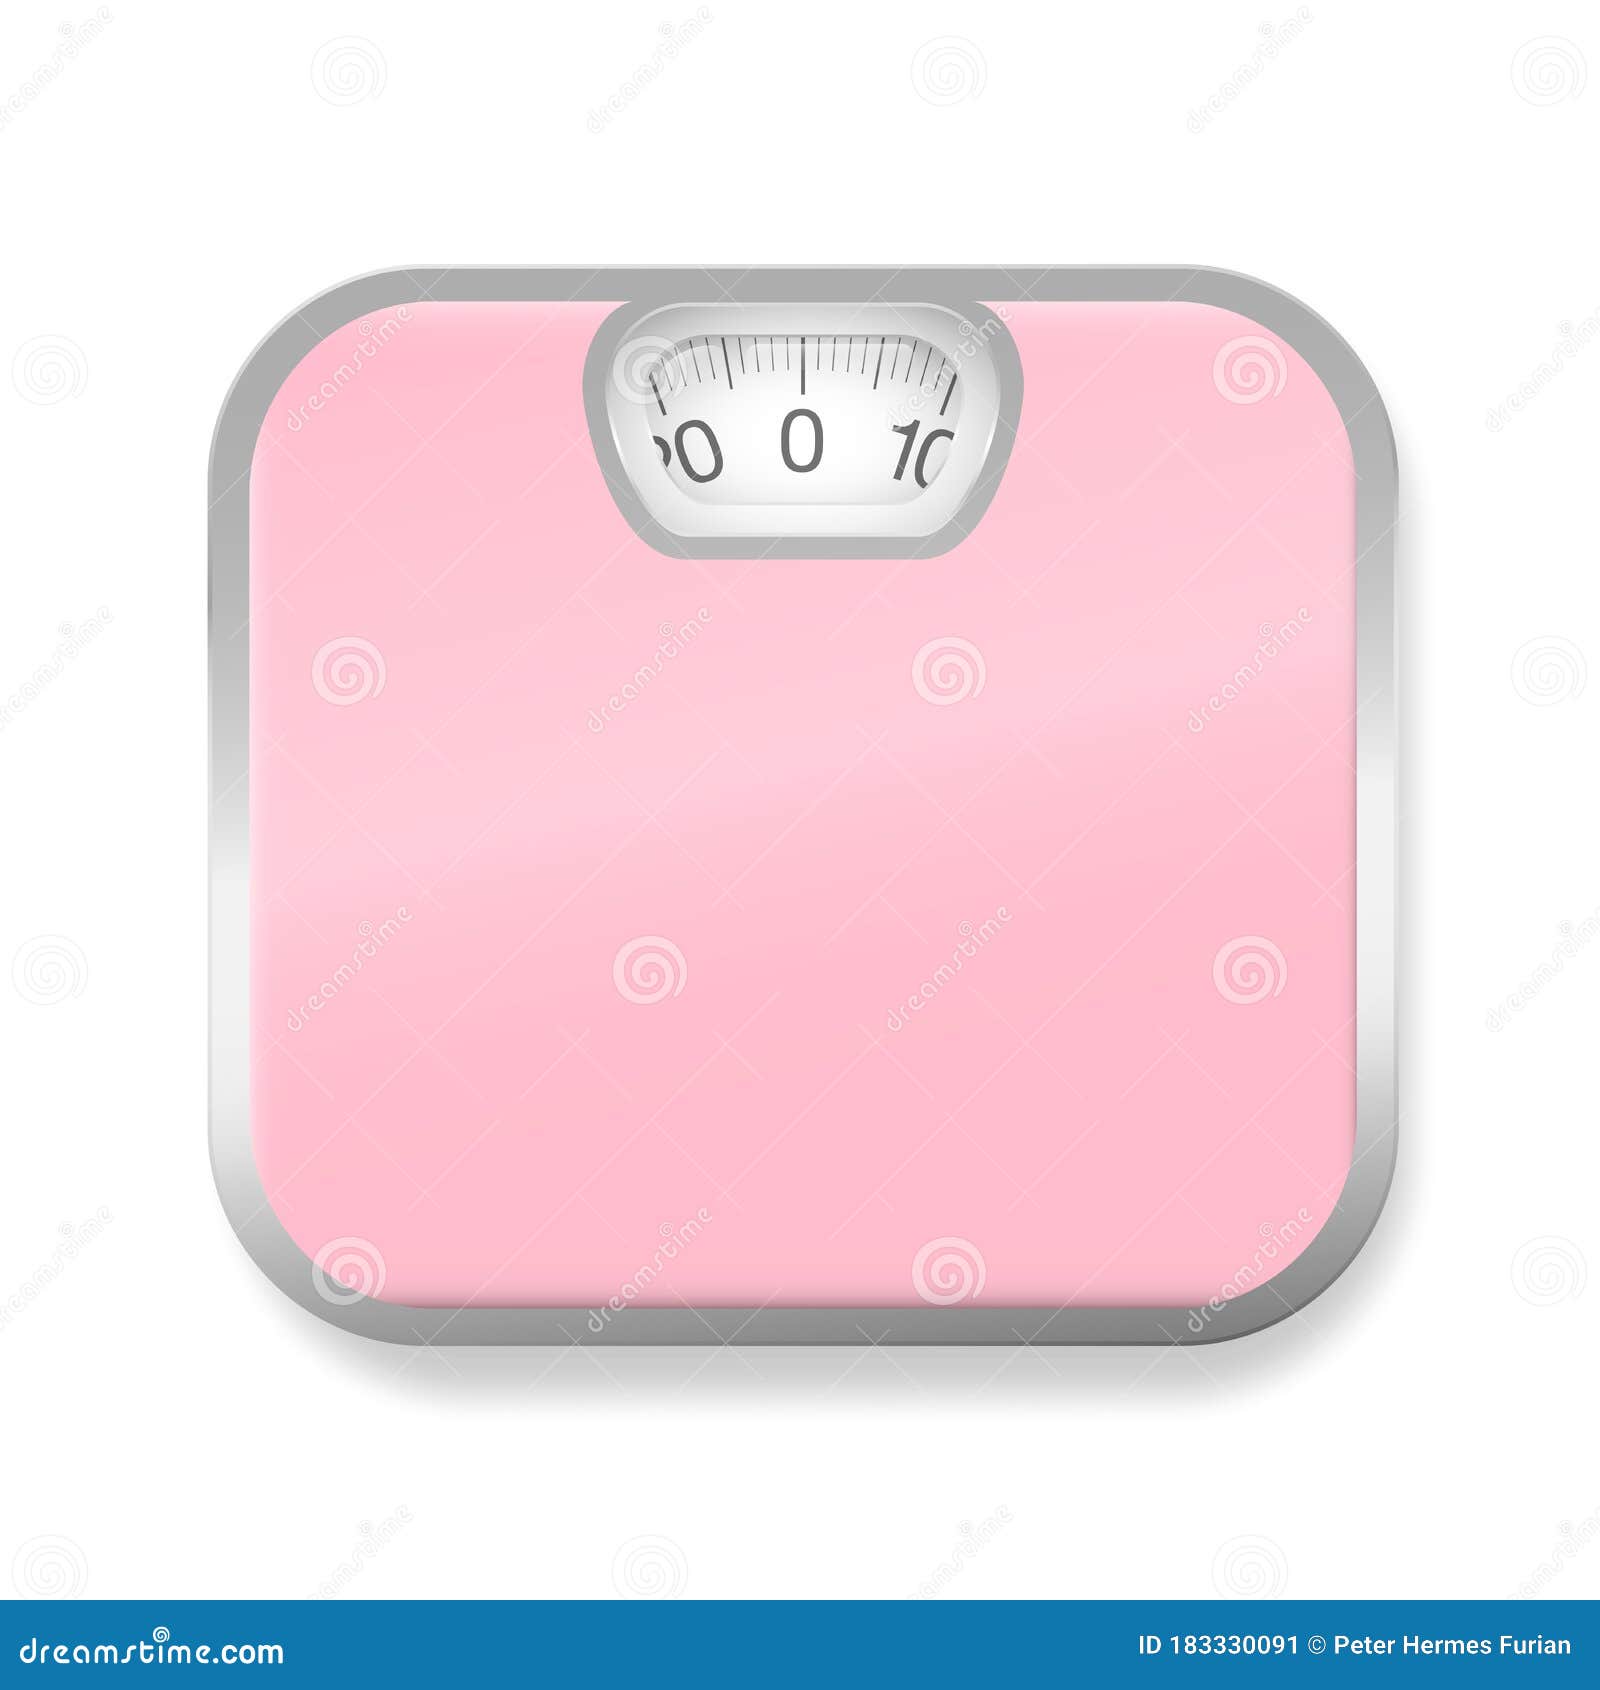 Bathroom Scales Pink Personal Scales Stock Vector - Illustration of lady,  bathroom: 183330091